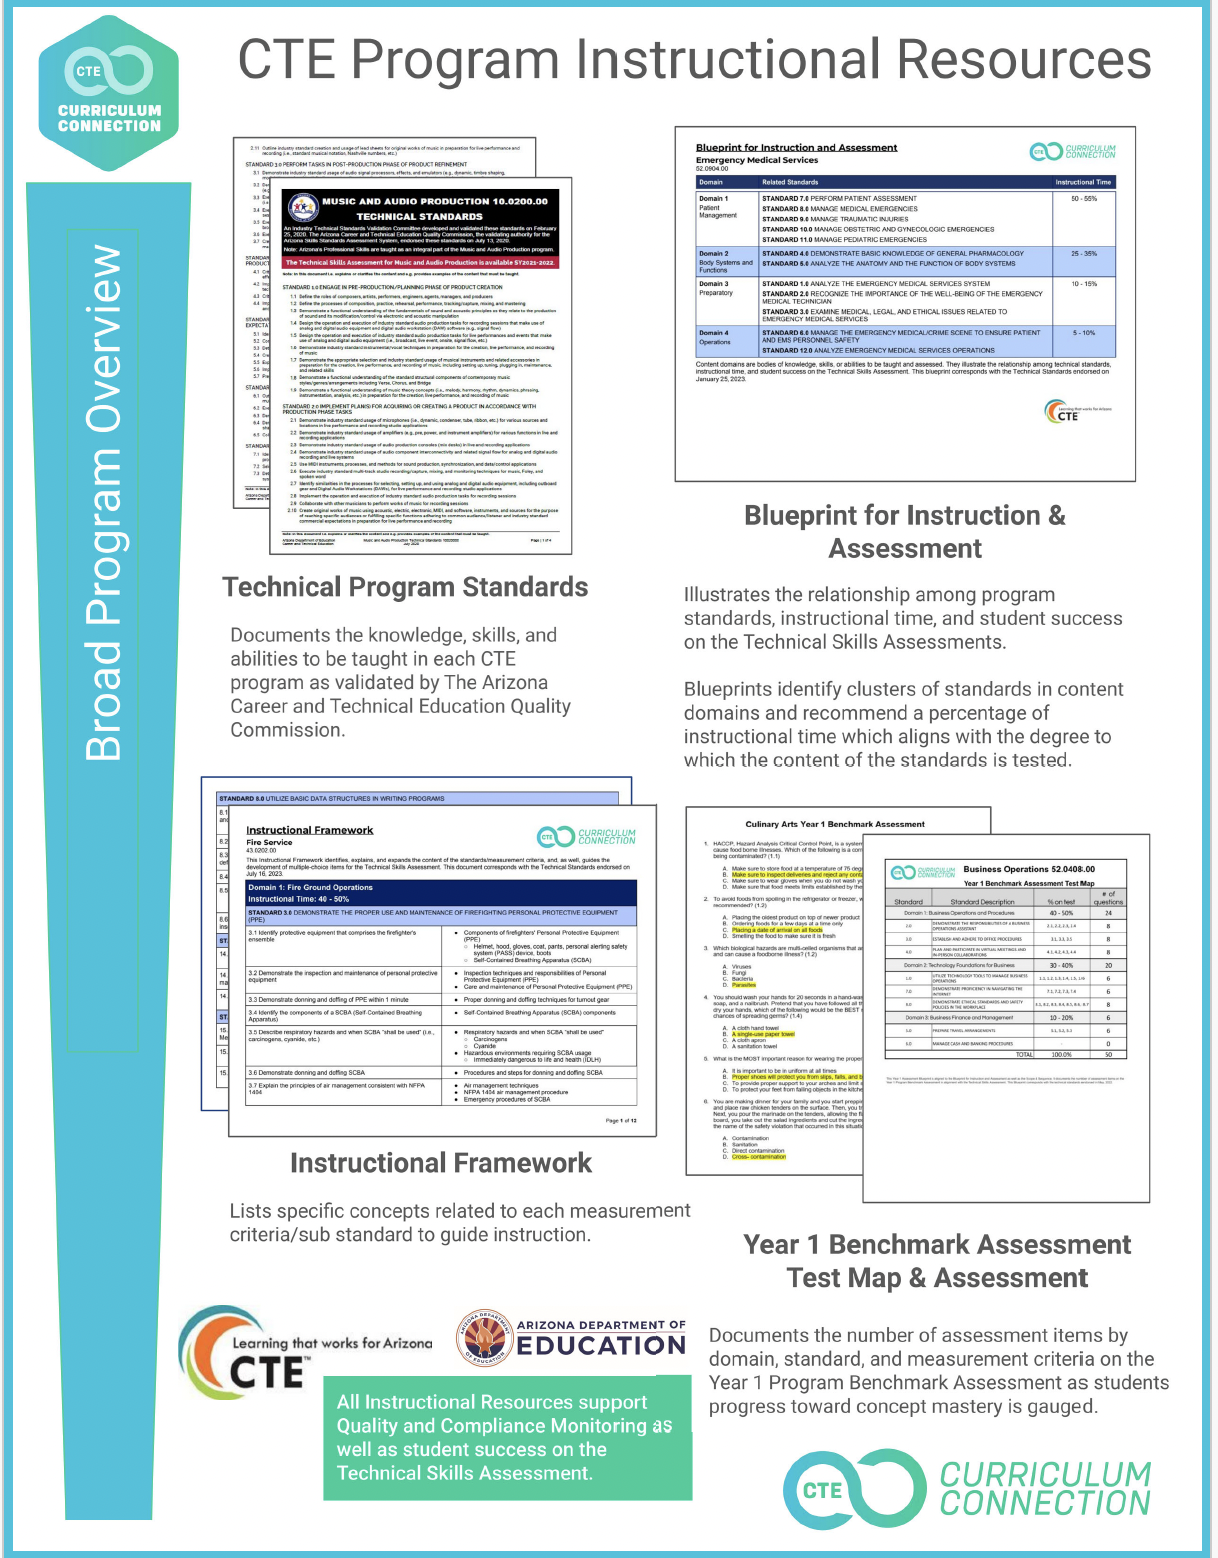 Instructional Resources Overview